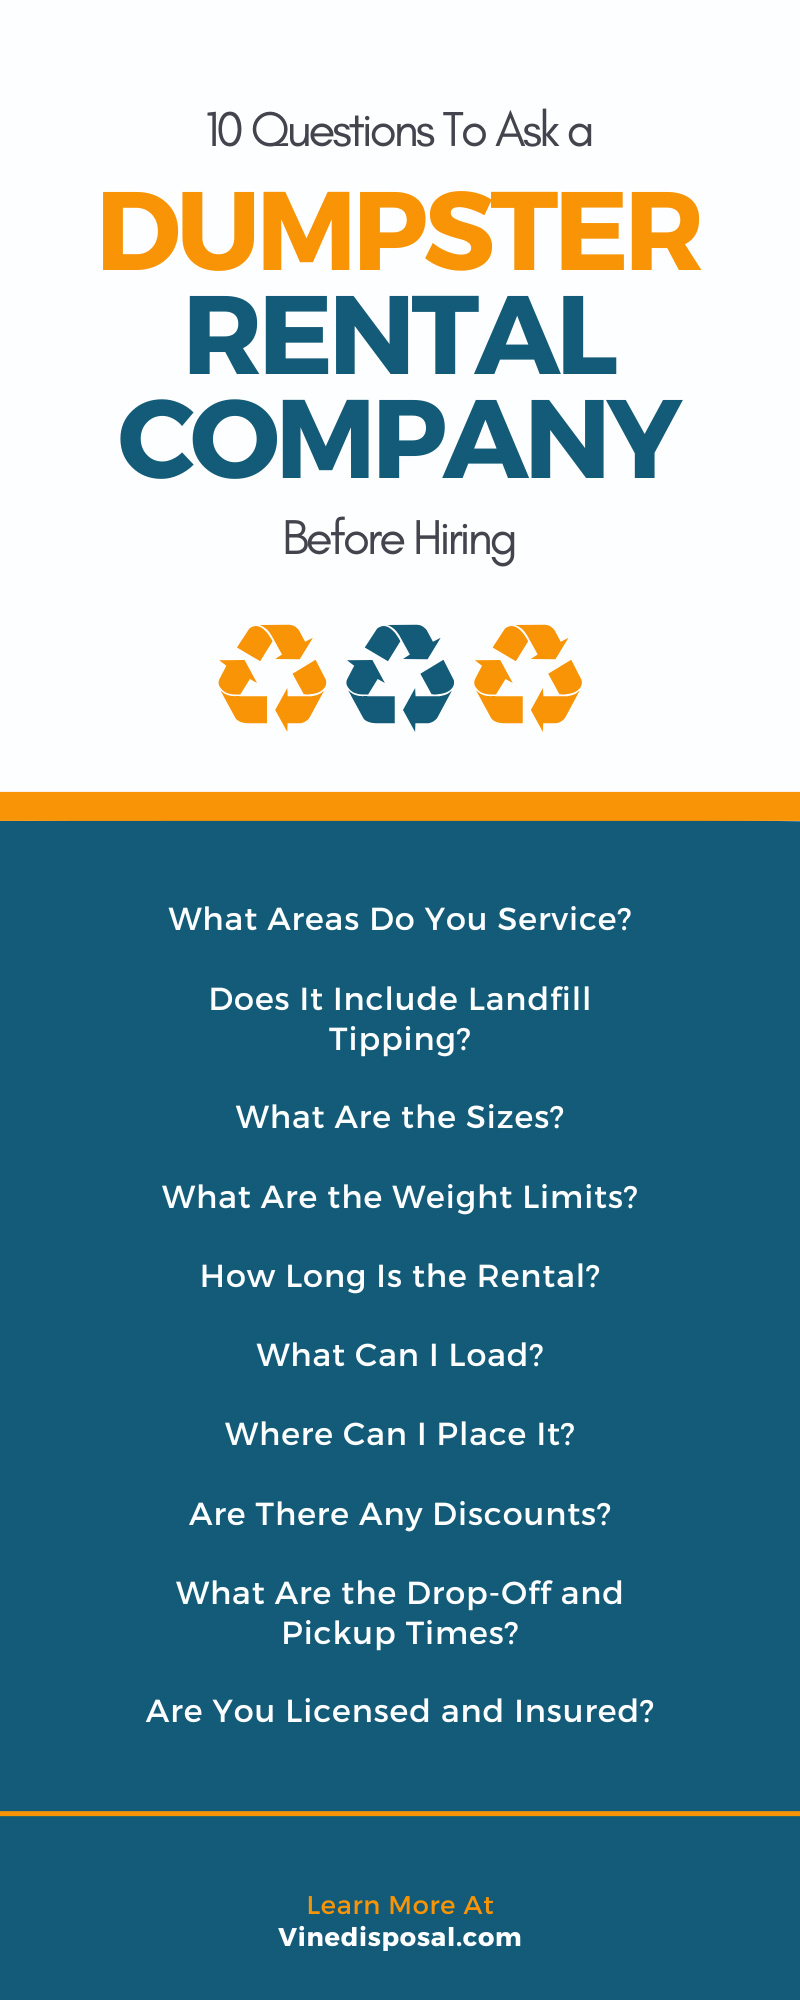 10 Questions To Ask a Dumpster Rental Company Before Hiring